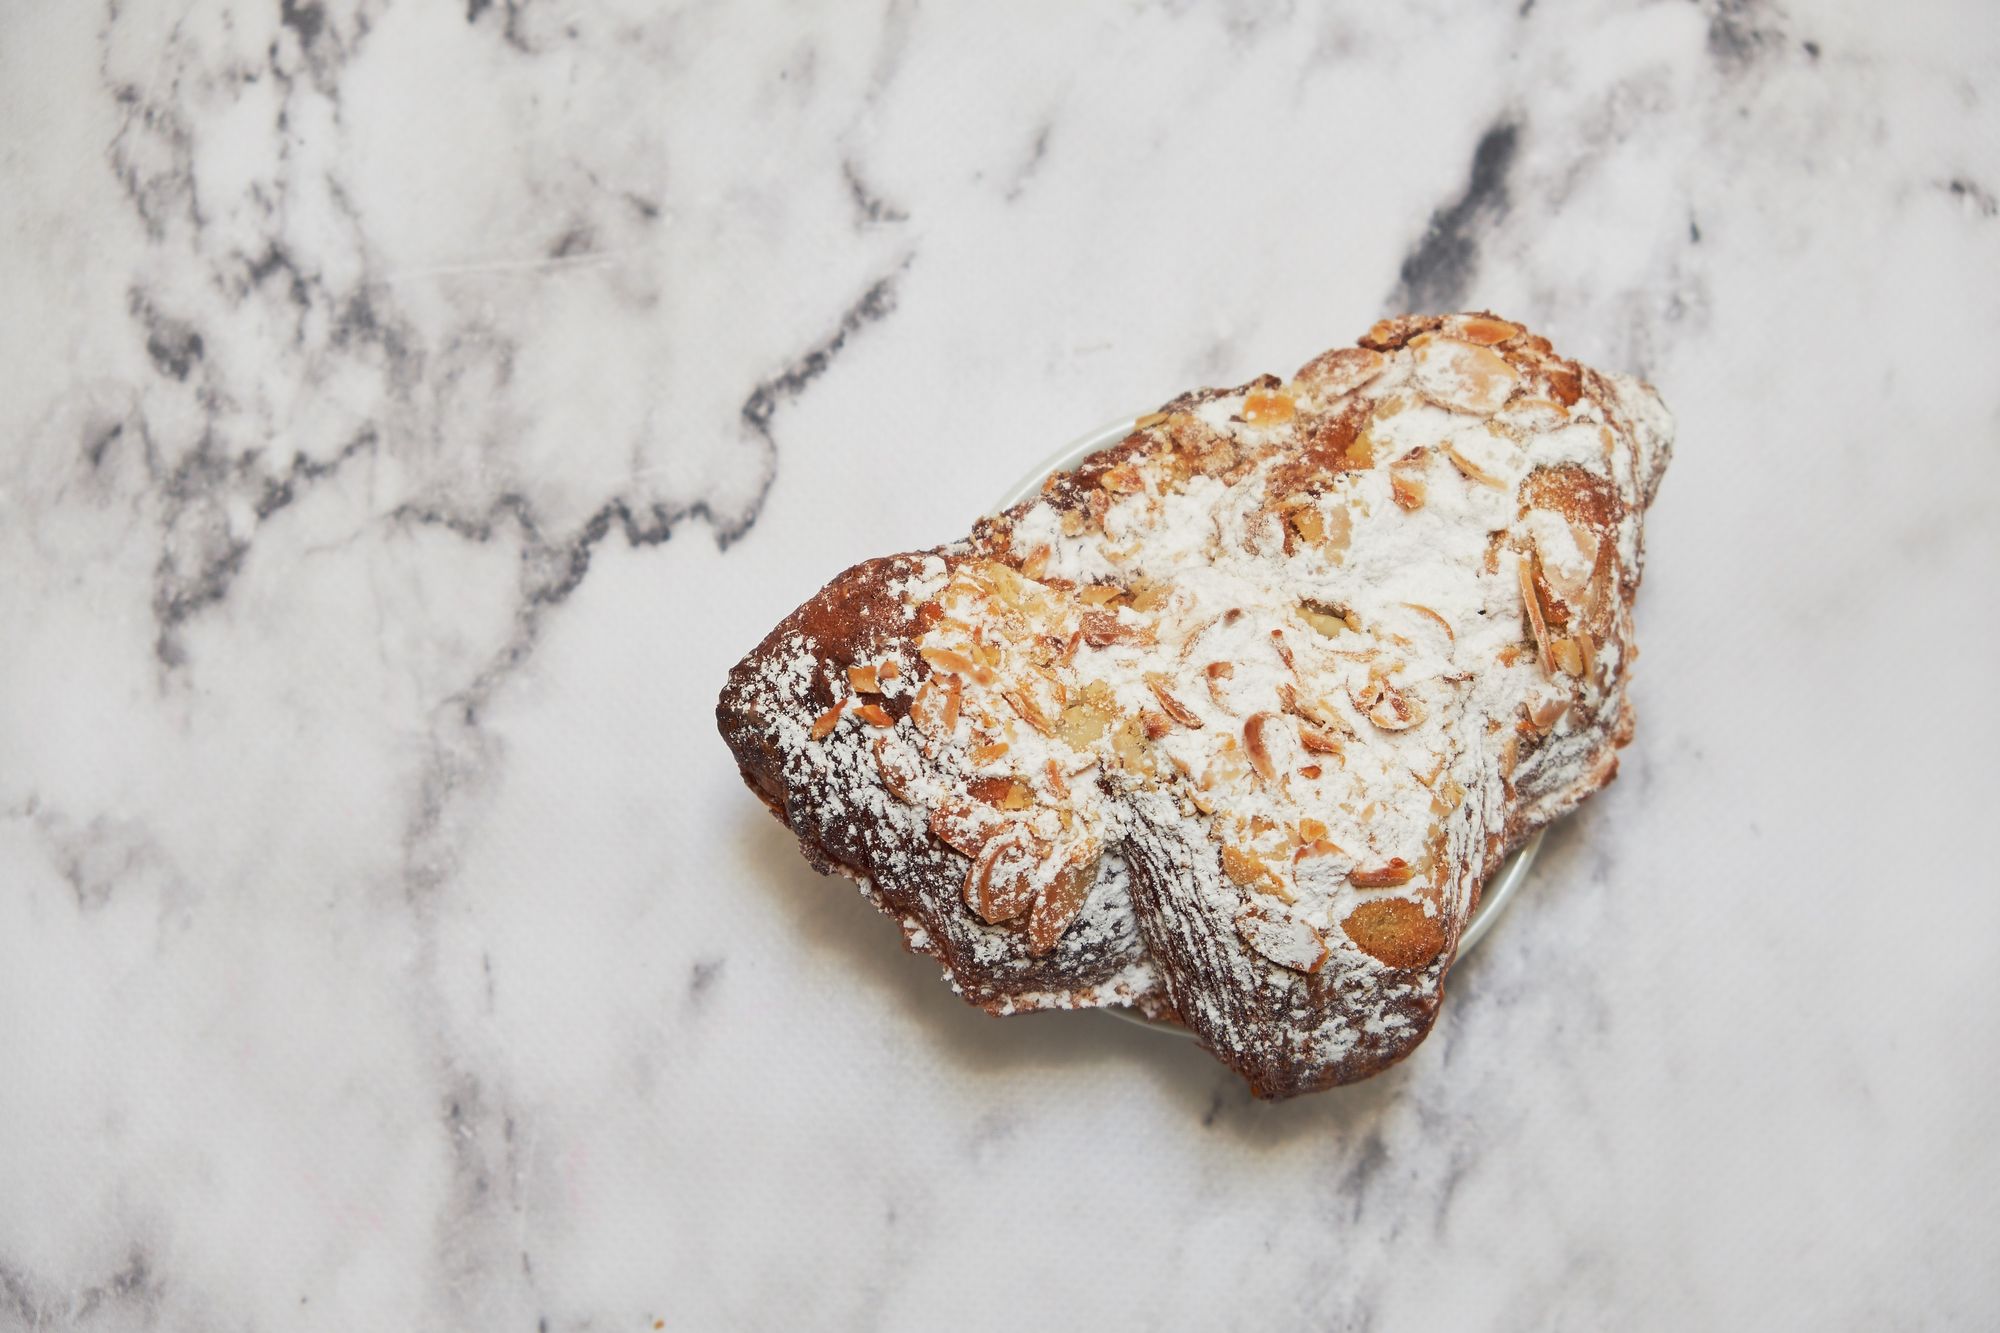 Best Almond Croissants in Greater Vancouver [GUIDE]